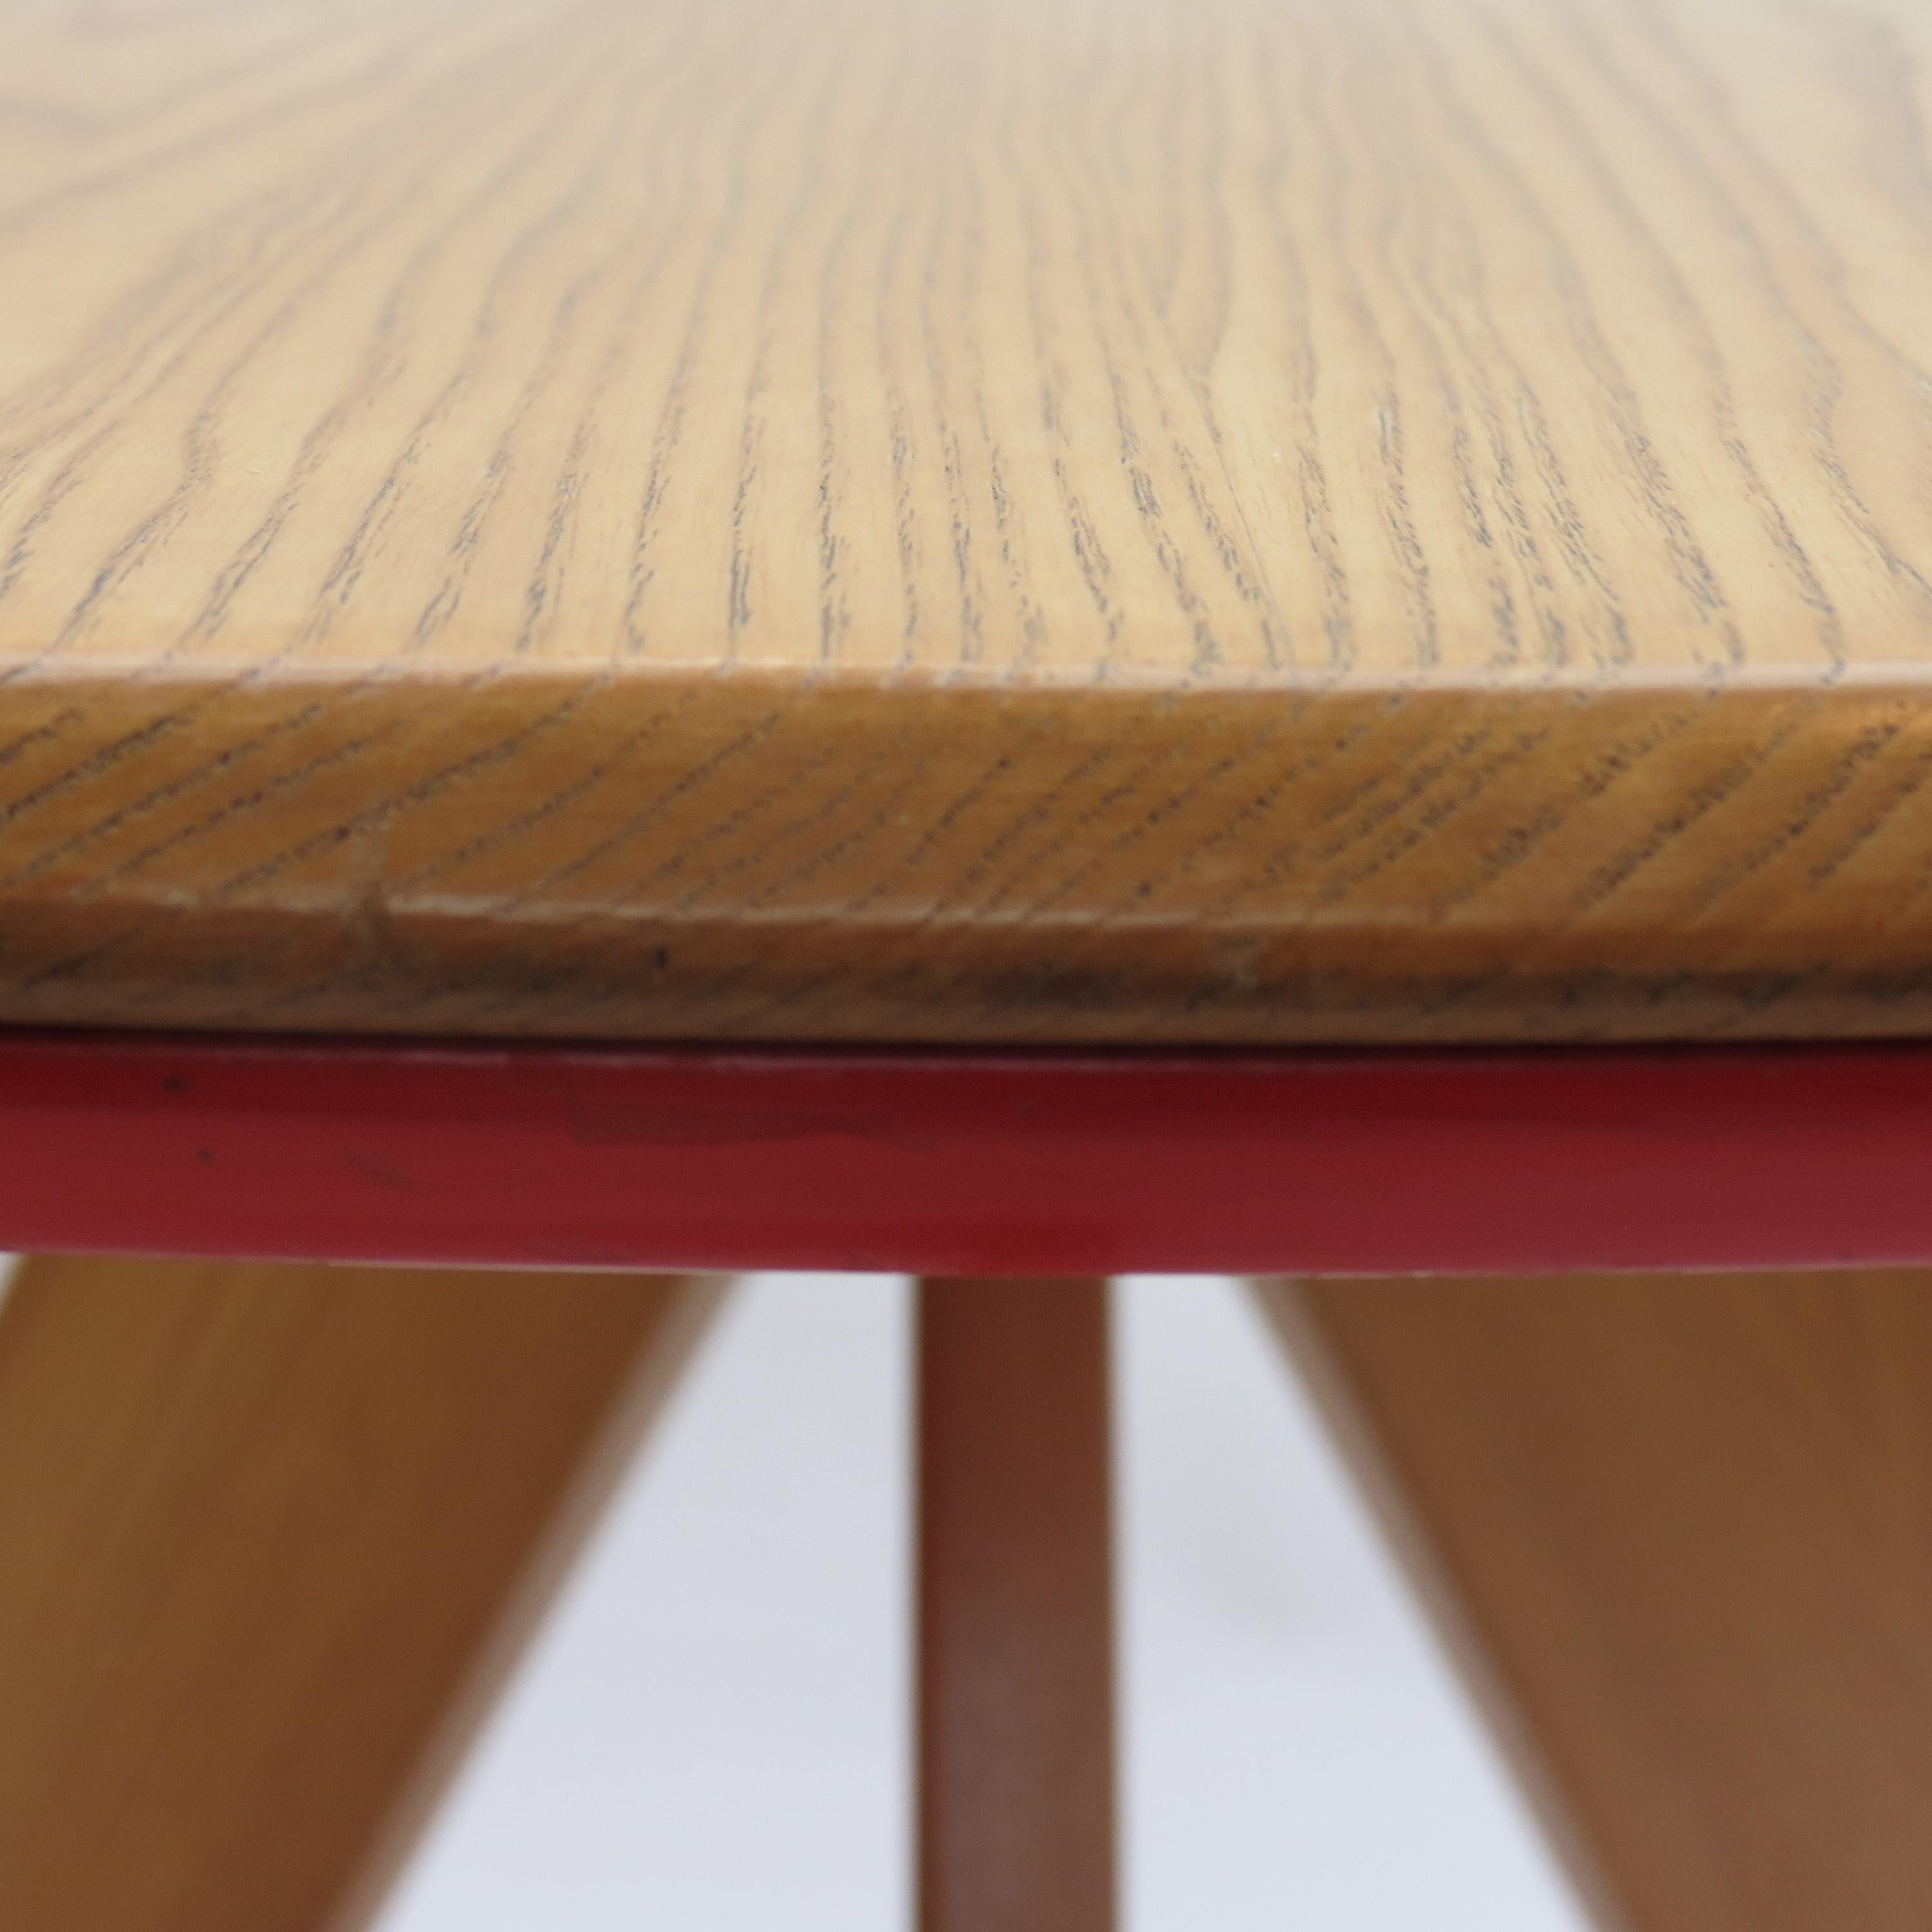 Midcentury Bespoke Round Dining Table by David Field 1980s with Red and Blue Det 4